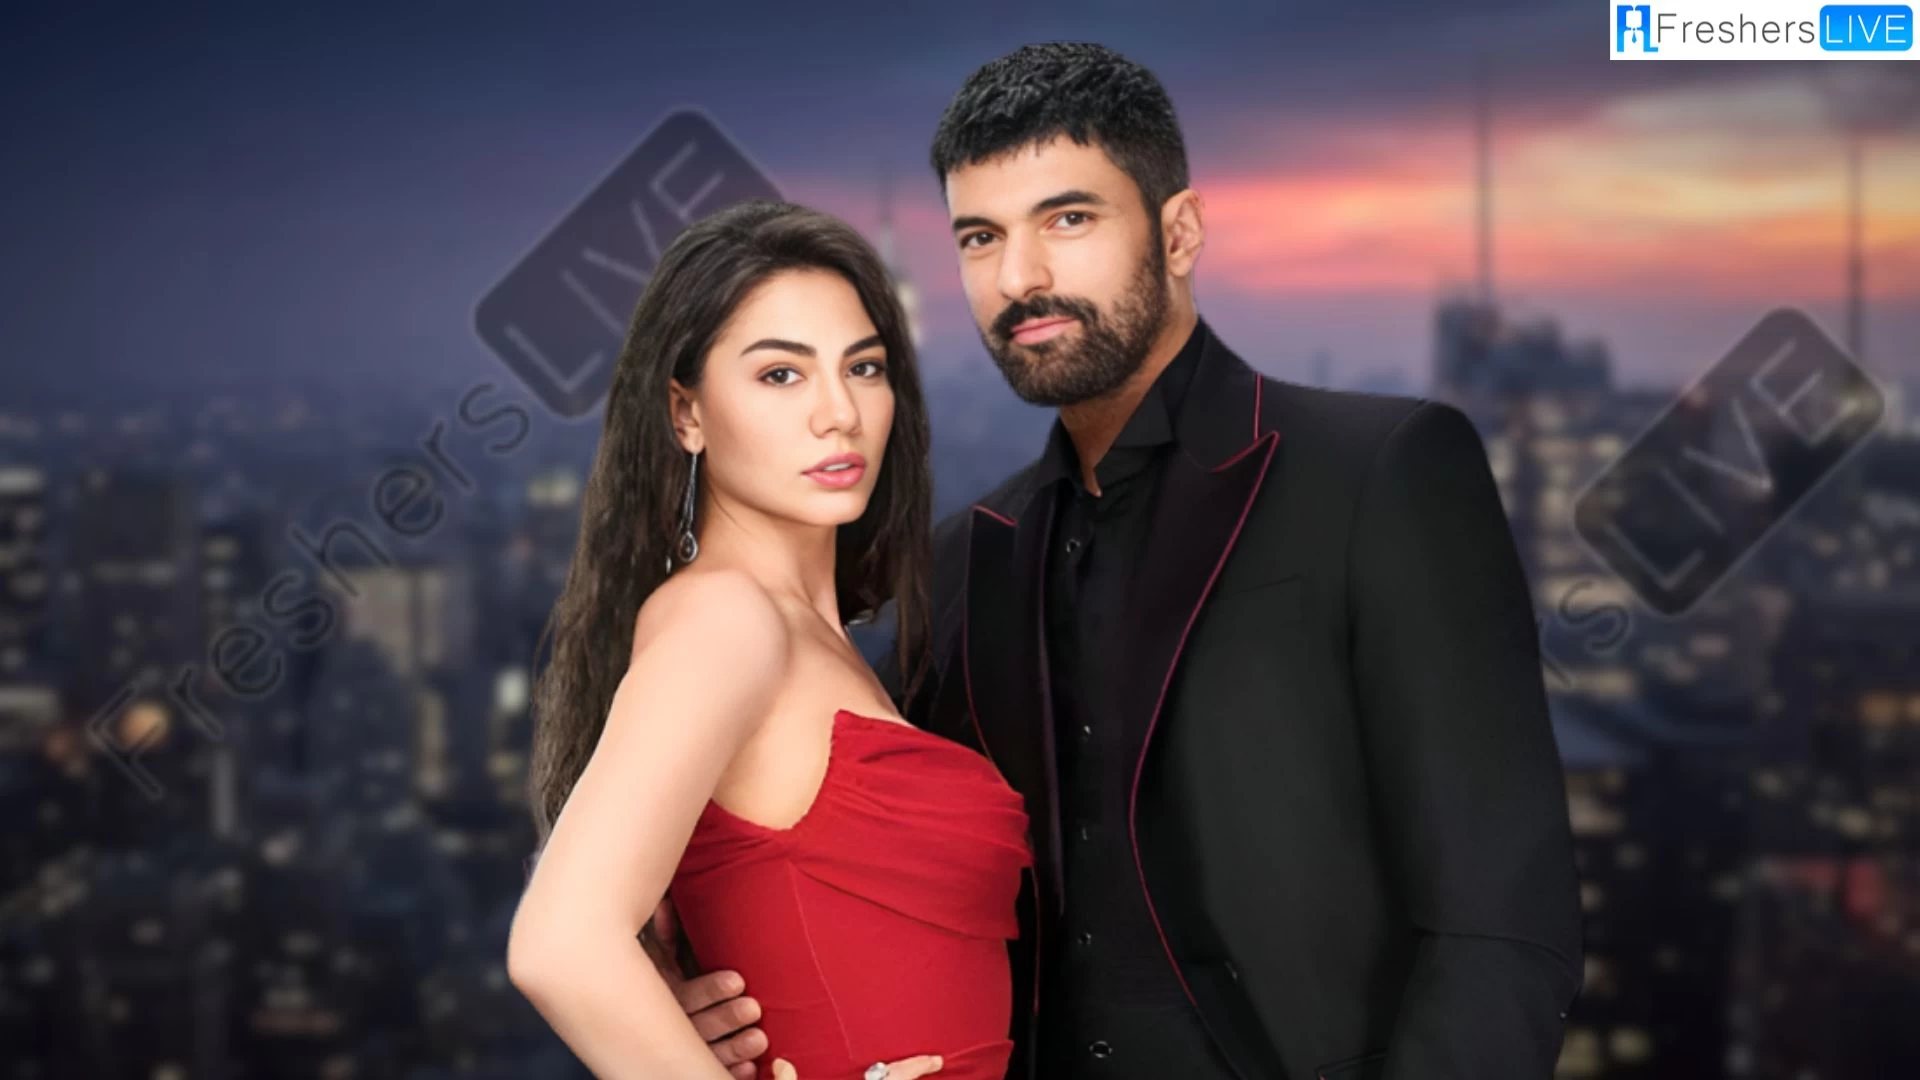 Adim Farah Season 2 Episode 1 Release Date and Time, Countdown, When is it Coming Out?